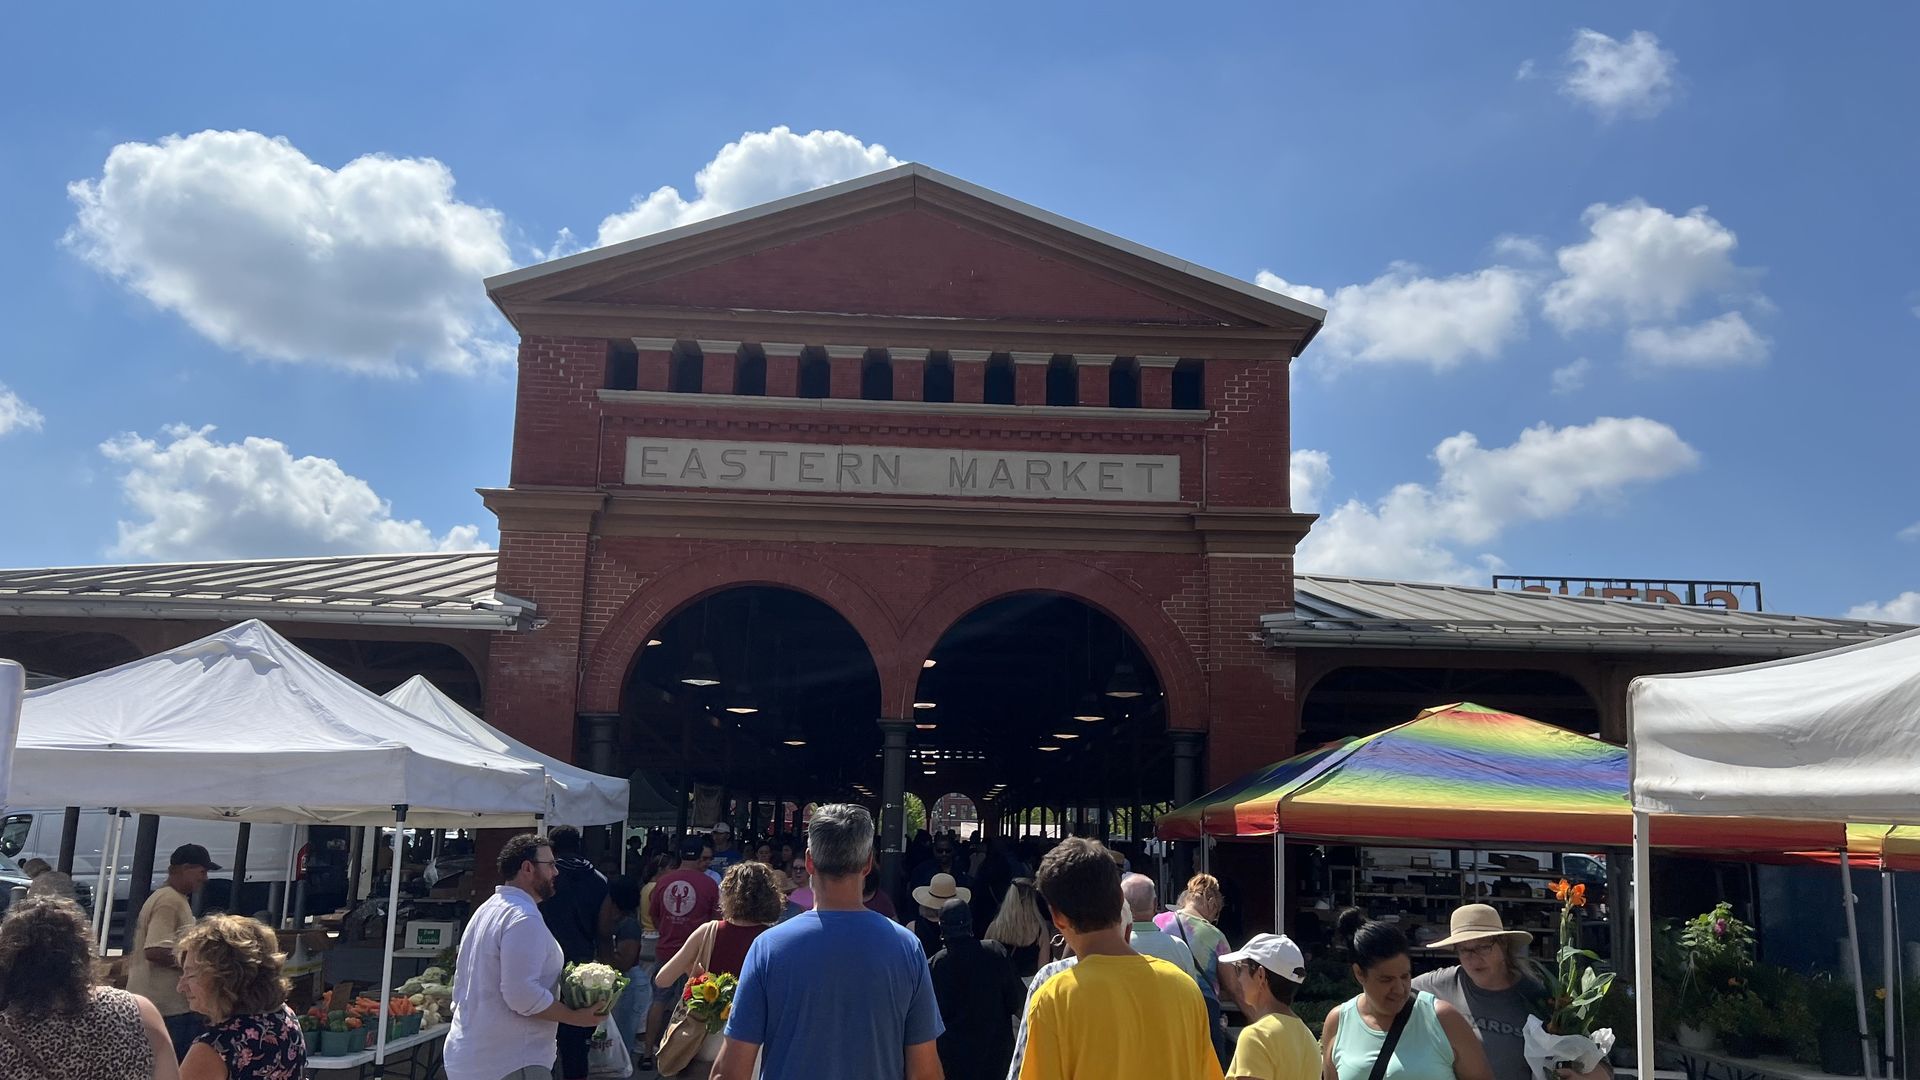 Eastern market shed with shoppers walking through the entrance.